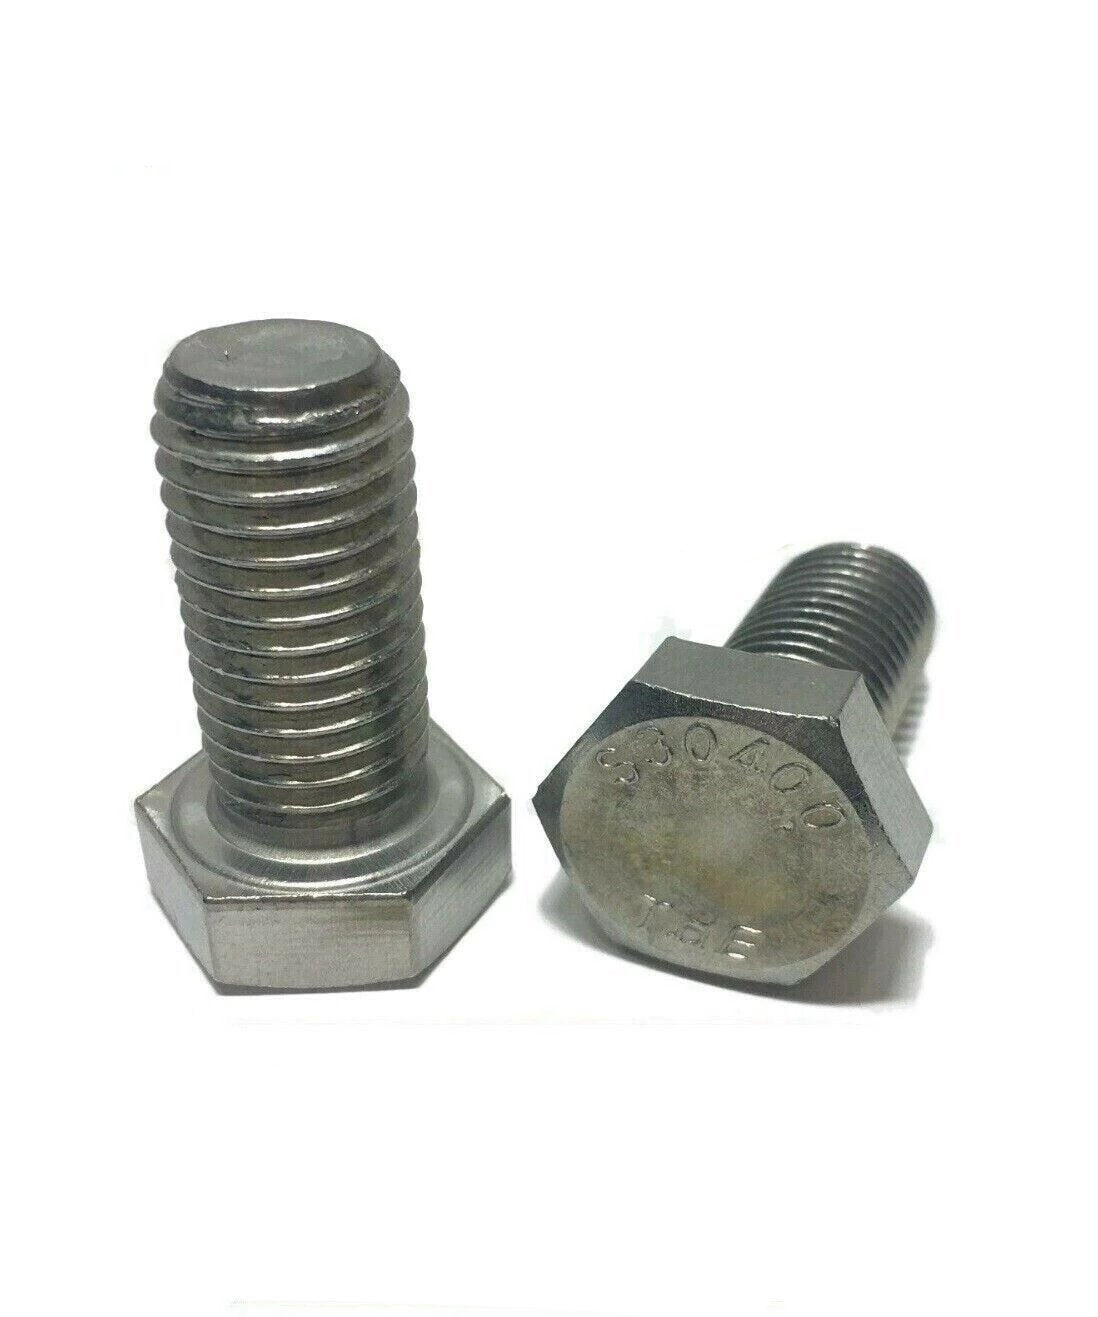 3/4-10 x 1-1/2" StaInless Steel Hex Cap Screw / Tap Bolt 18-8 / 304